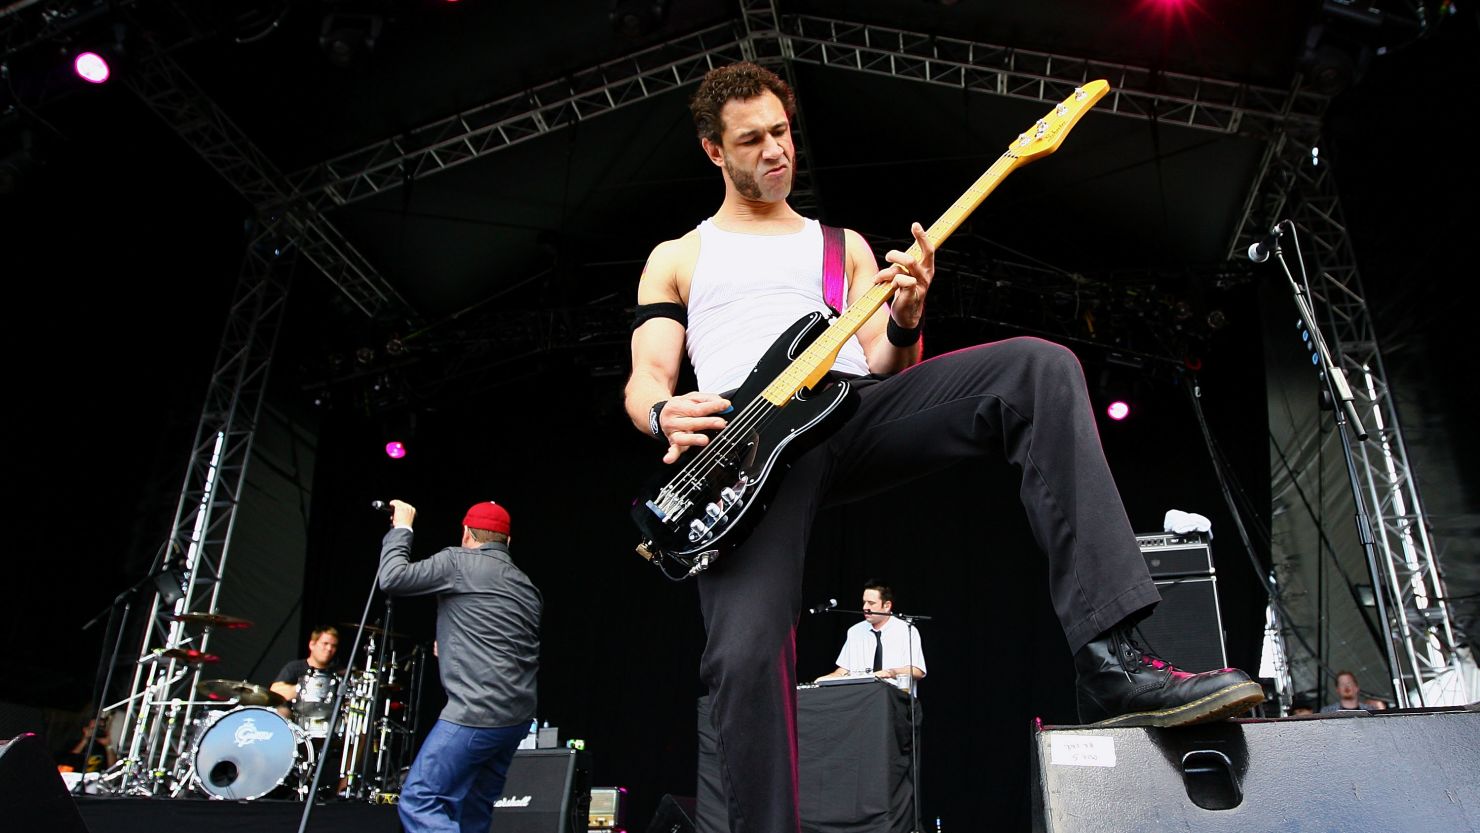 'Evil' Jared Hasselhoff of the band Bloodhound Gang performs on stage in 2009 in Australia. 